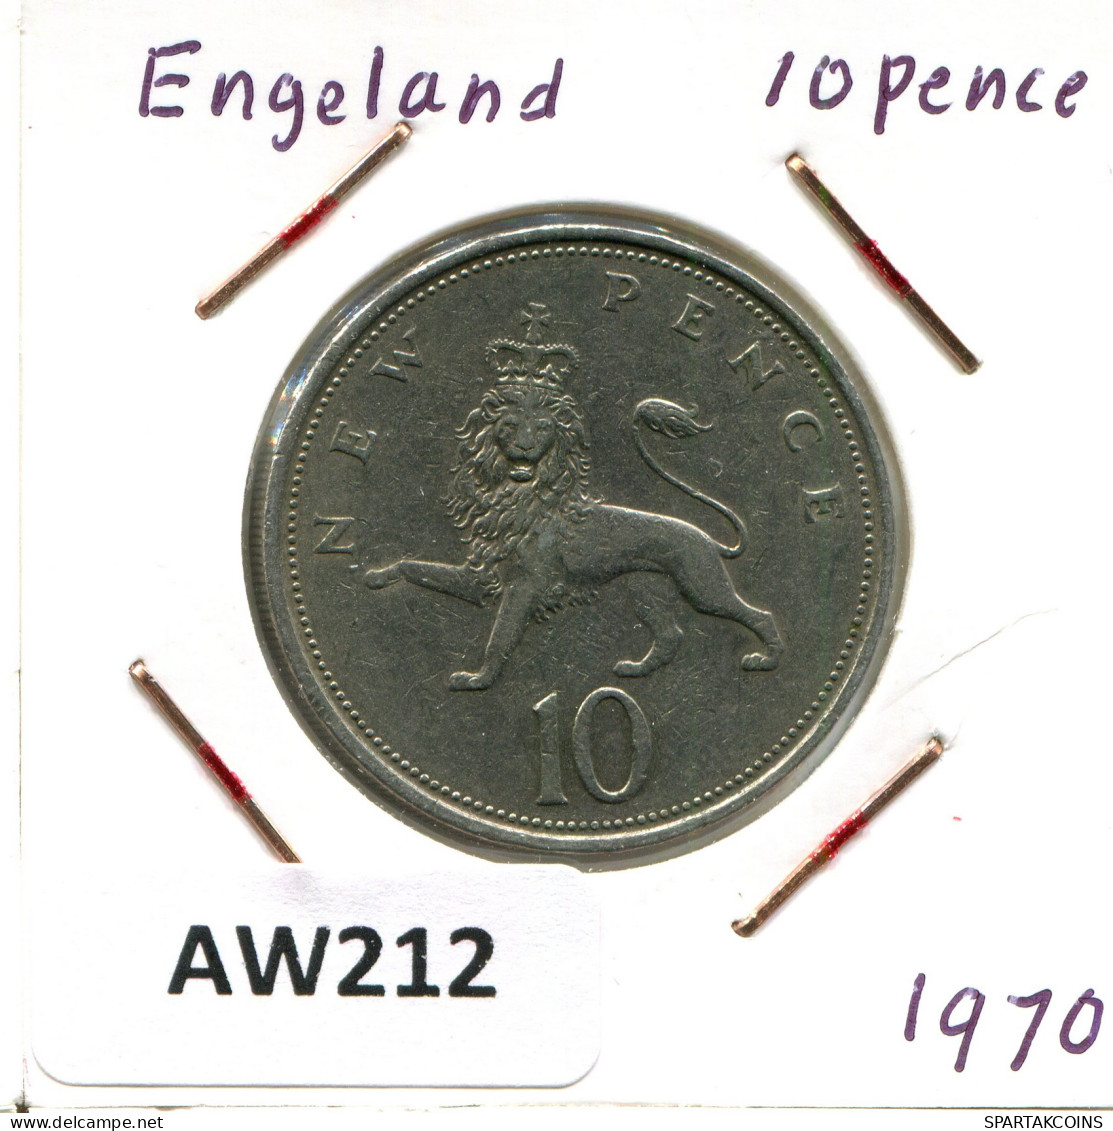 10 PENCE 1970 UK GRANDE-BRETAGNE GREAT BRITAIN Pièce #AW212.F - 10 Pence & 10 New Pence